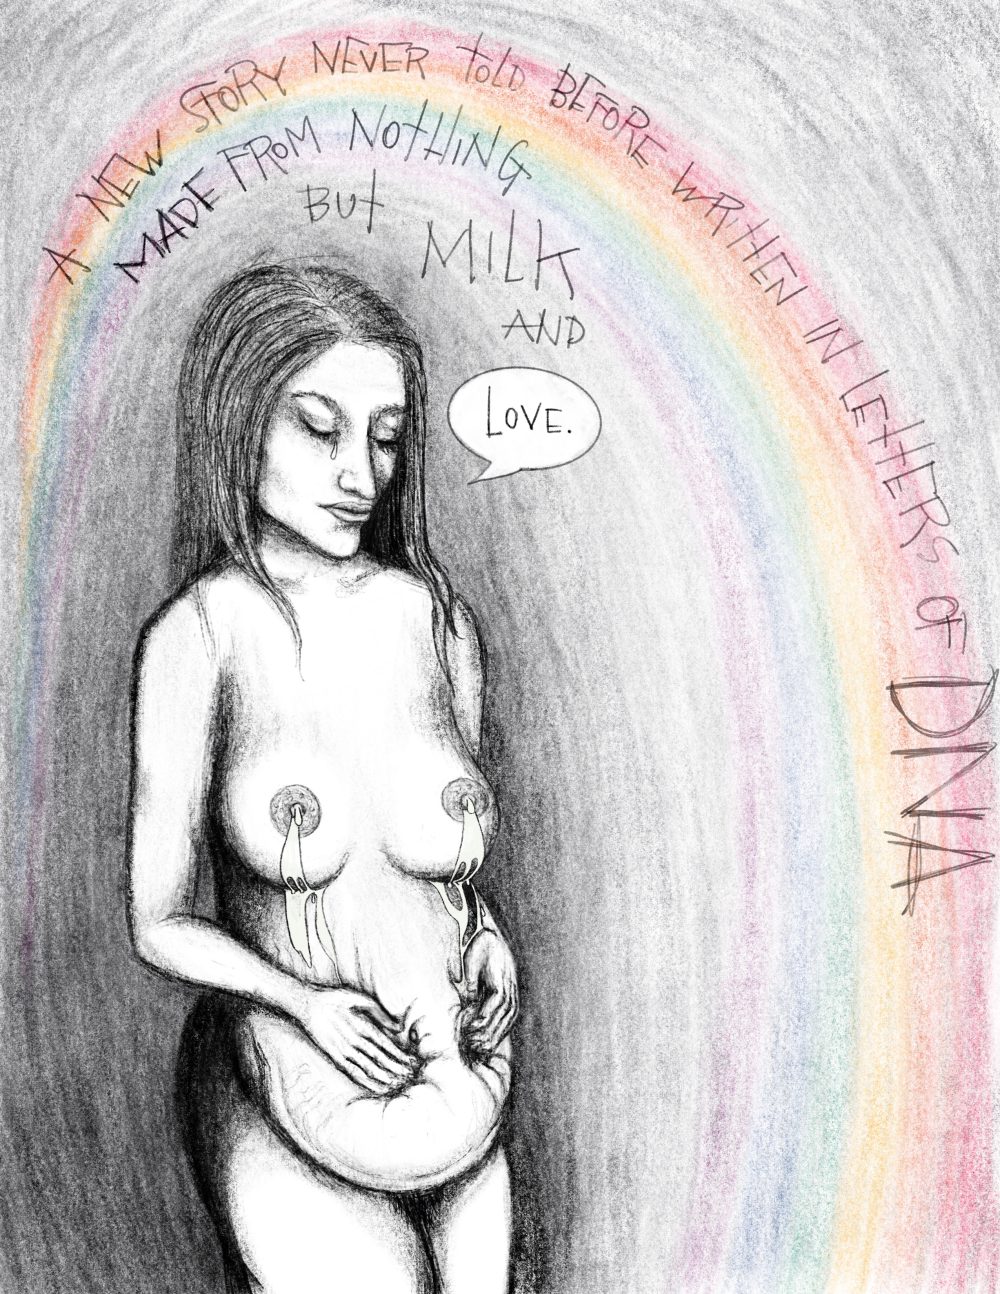 The video begins with a panning shot of a 2-D drawing of a woman, she is looking down with a tear in hear eye, there is writing above her, superimposed atop a rainbow, which is the only color in the drawing, the handwriting says "A new story never told before written in letters of DNA, made from nothing but milk and love", the word love is in a comic book speech bubble from the woman, as the camera pans down we see that she has a bare chest and milk is streaming from her nipples and down her empty belly, which she is clutching the sagging skin from, video fades to black, same image is shown again, this time zoomed out, and the words and rainbow are animated, video fades to black, image of just the woman reappears, zoomed in, the sketch has been cleaned up and the drawing is cleaner, the beginning of the milk animation starts, and it streams down her breasts onto her belly, video fades to black, now it's a zoomed out shot of the artist working on the animation on an ipad, the animation runs a few times, and then the artist adjusts the frame rate and the animation slows down, video fades to black, the final cleaned up, zoomed out animation is now shown, the text appears as the milk flows, video fades out to a final slow zoomed in panning shot of the final still that fades out with the music.